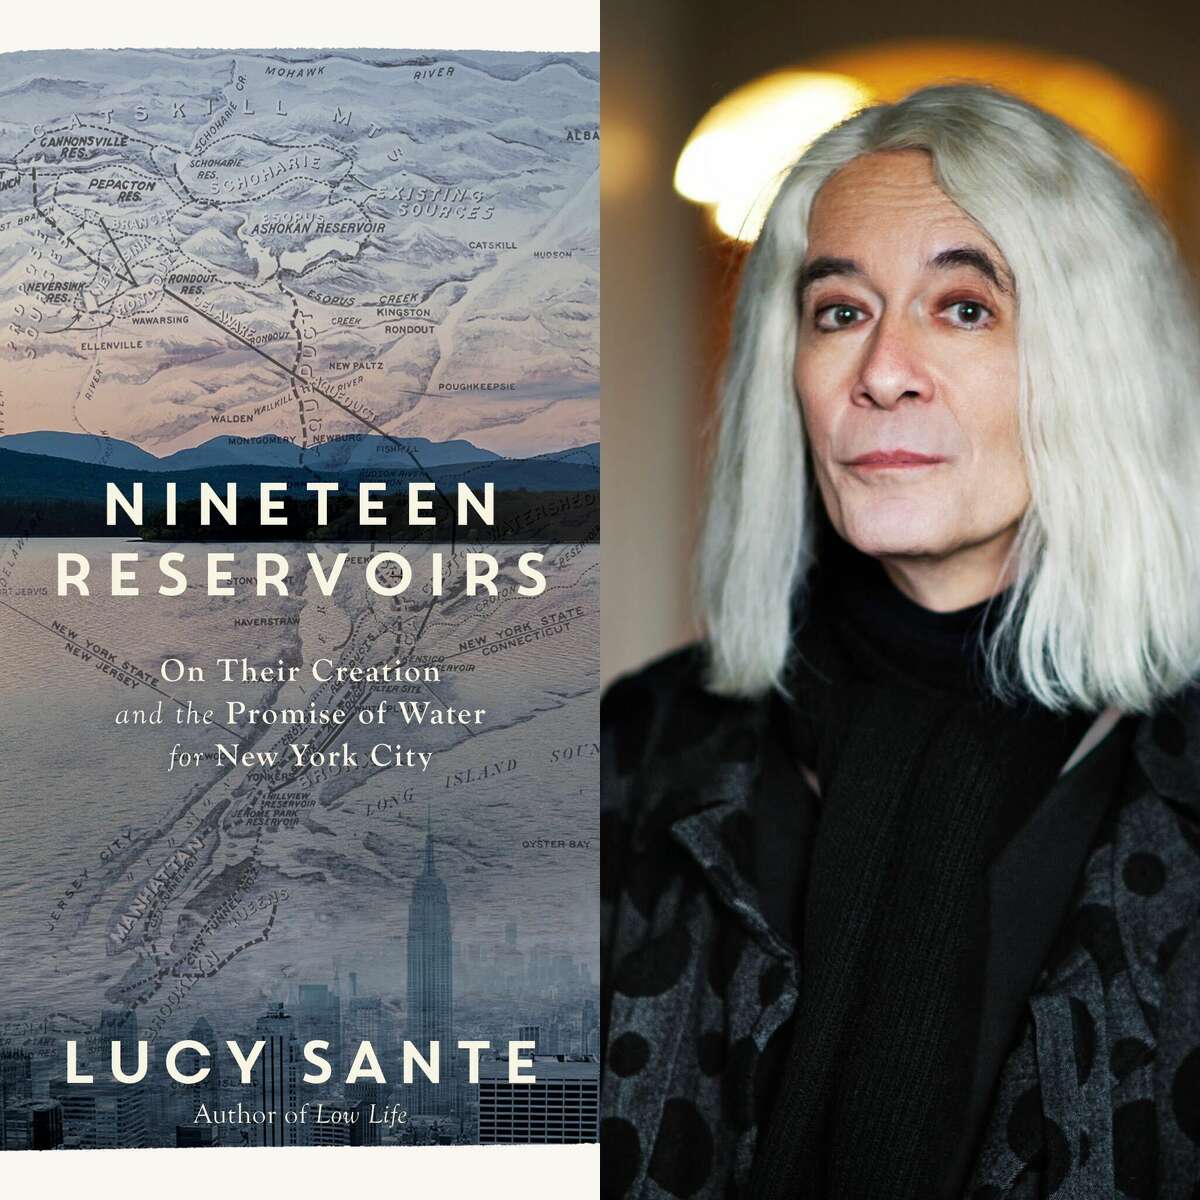 Lucy Sante’s new book, “Nineteen Reservoirs,” is an account of the creation of New York City’s water system. The author, who lives in the Hudson Valley, will give a reader at the Golden Notebook in Woodstock this Sunday. 